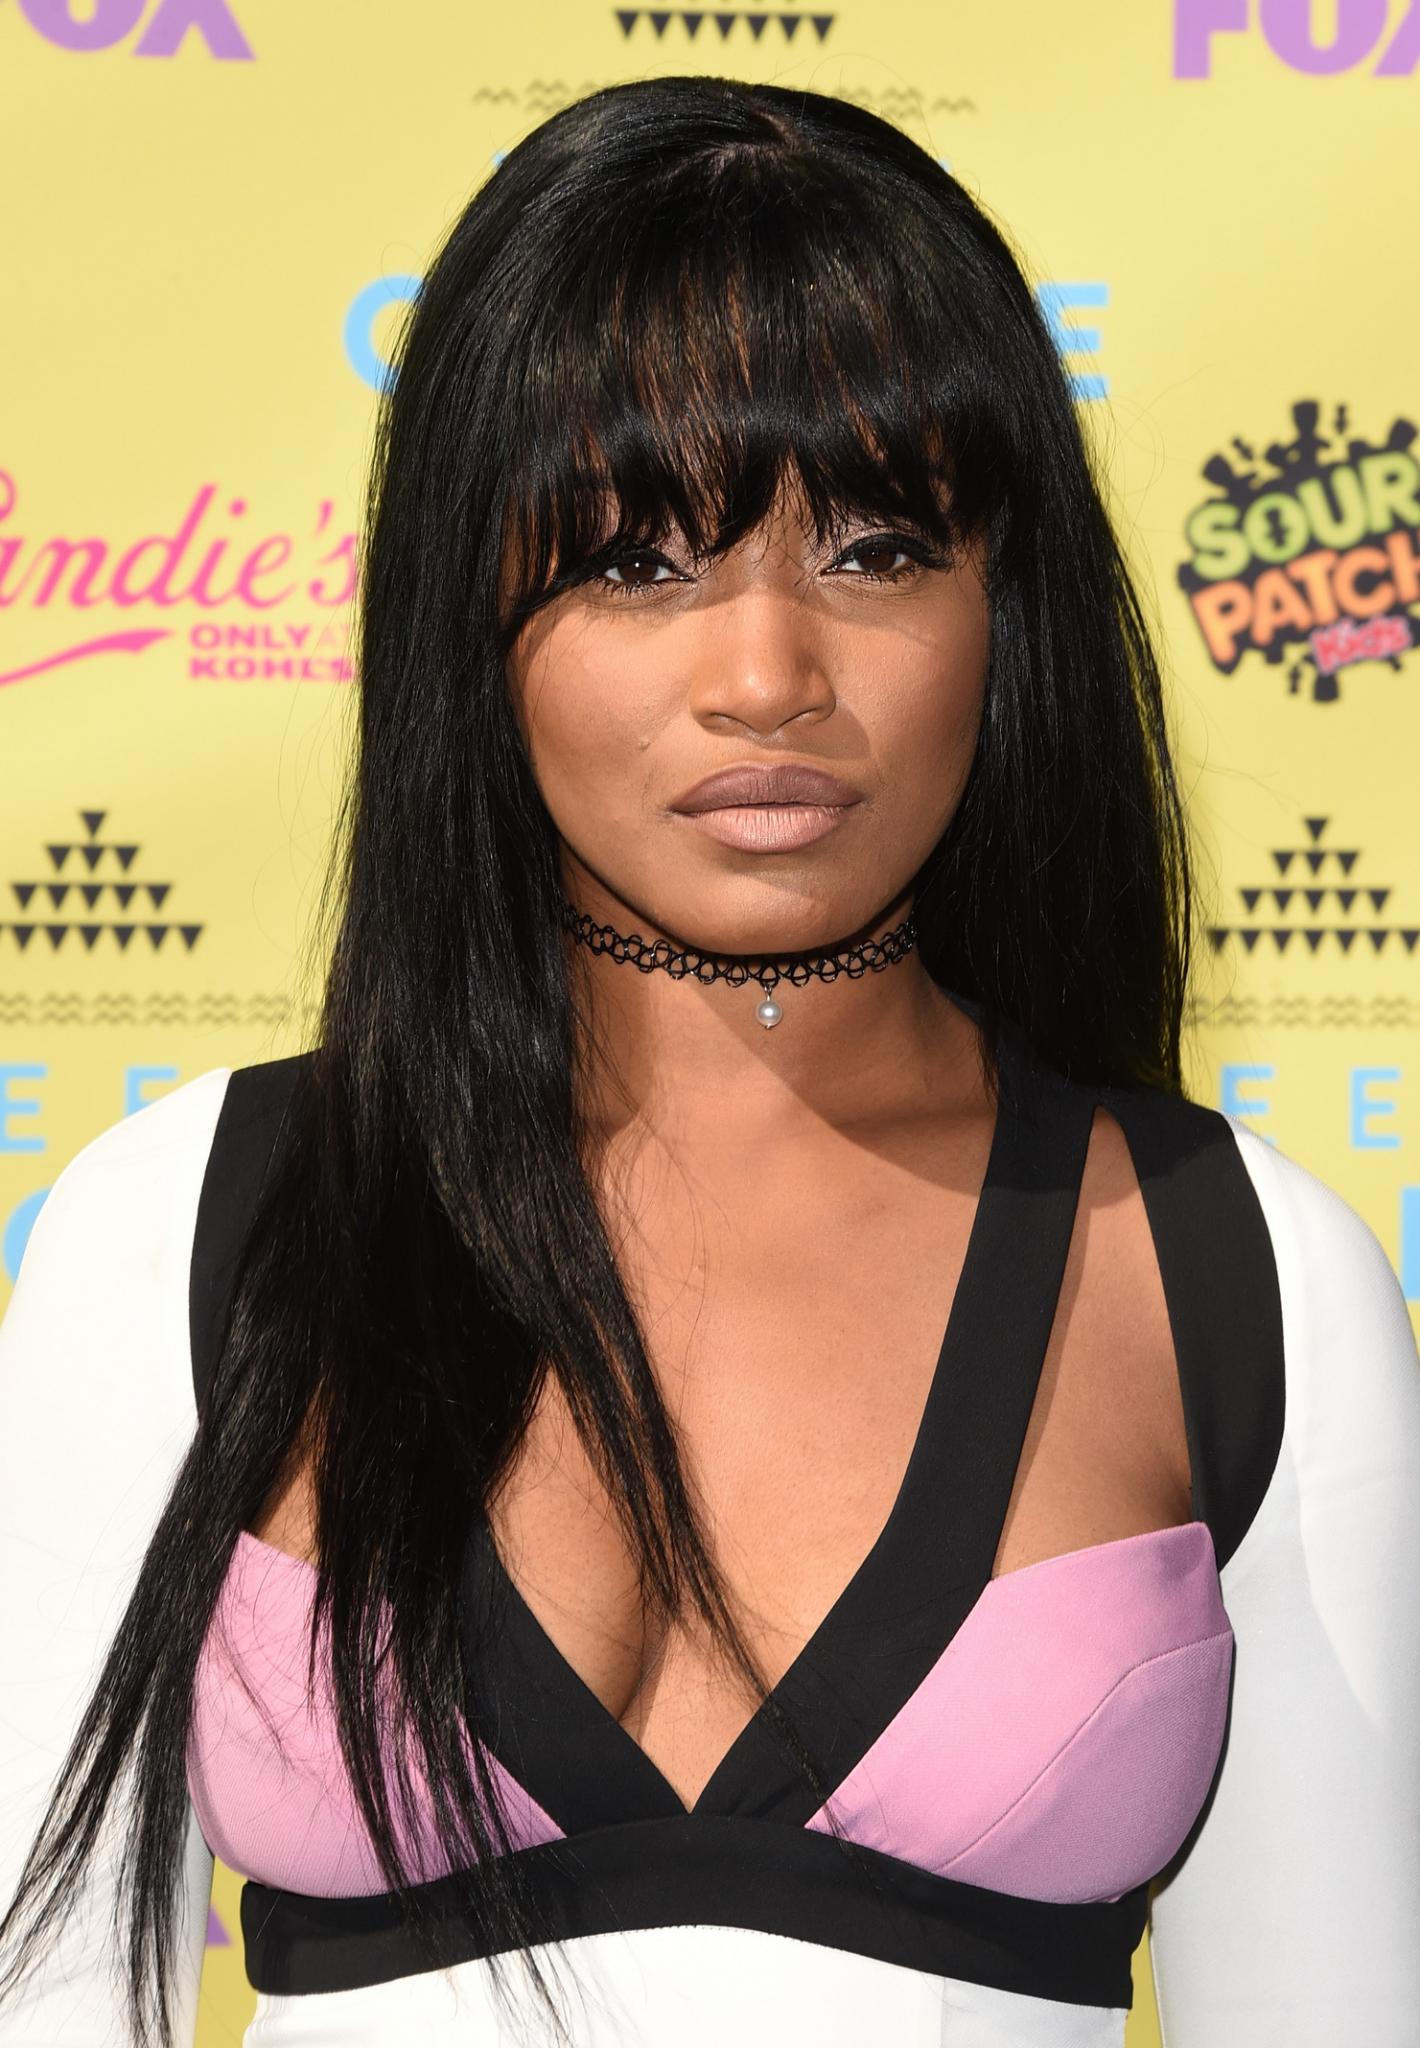 Keke Palmer on Her 'Scream Queens' Character: 'Zayday is Not a Stereotypically Black Character'
